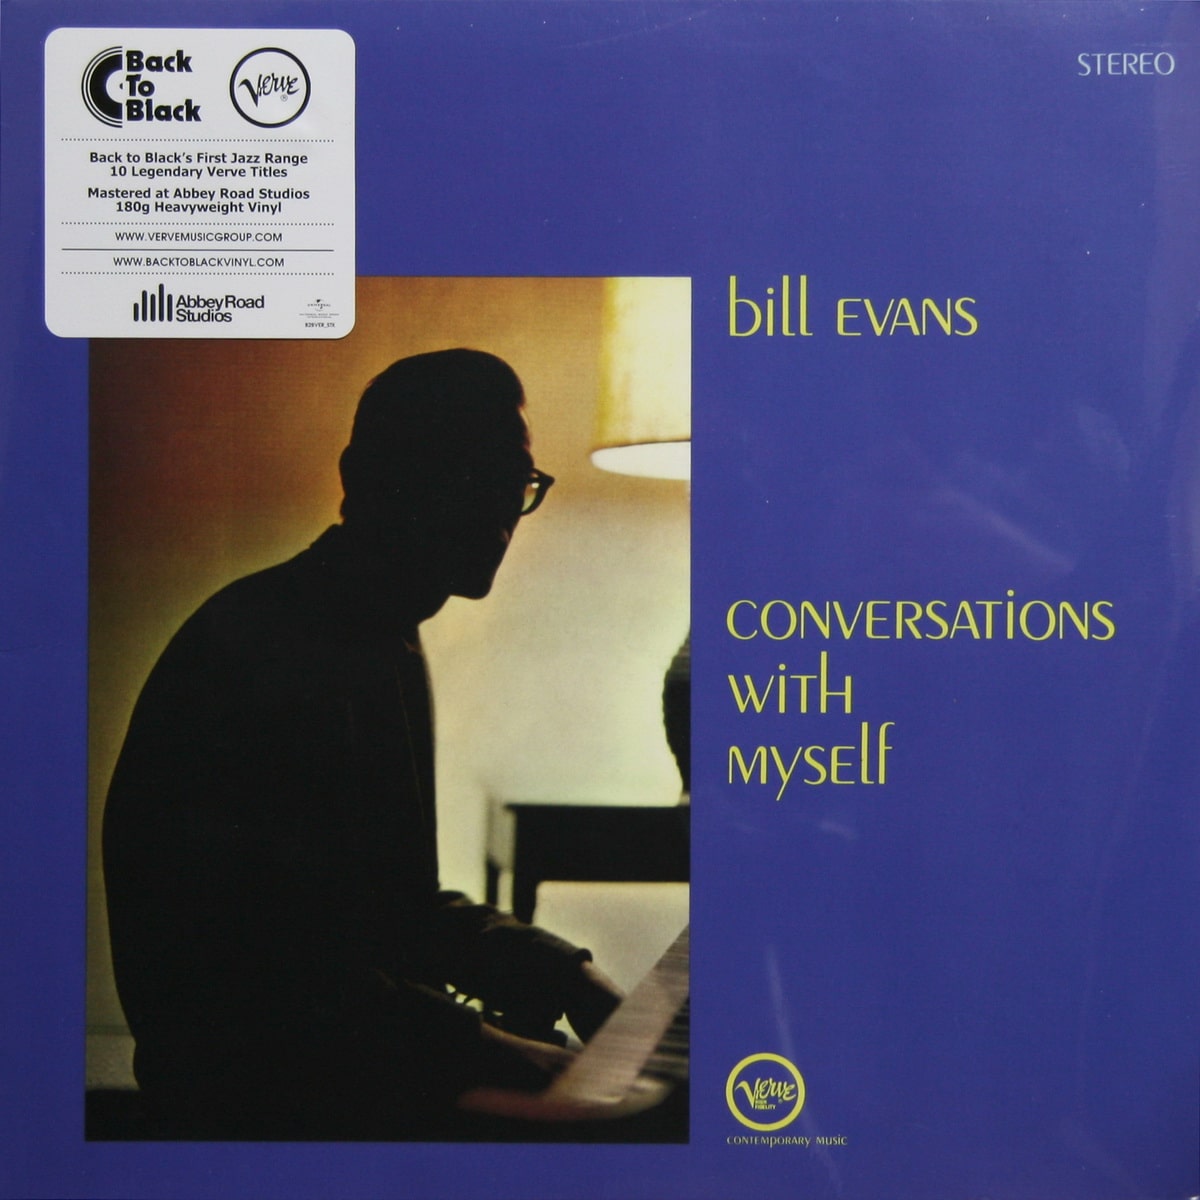 bill evans further conversations with myself